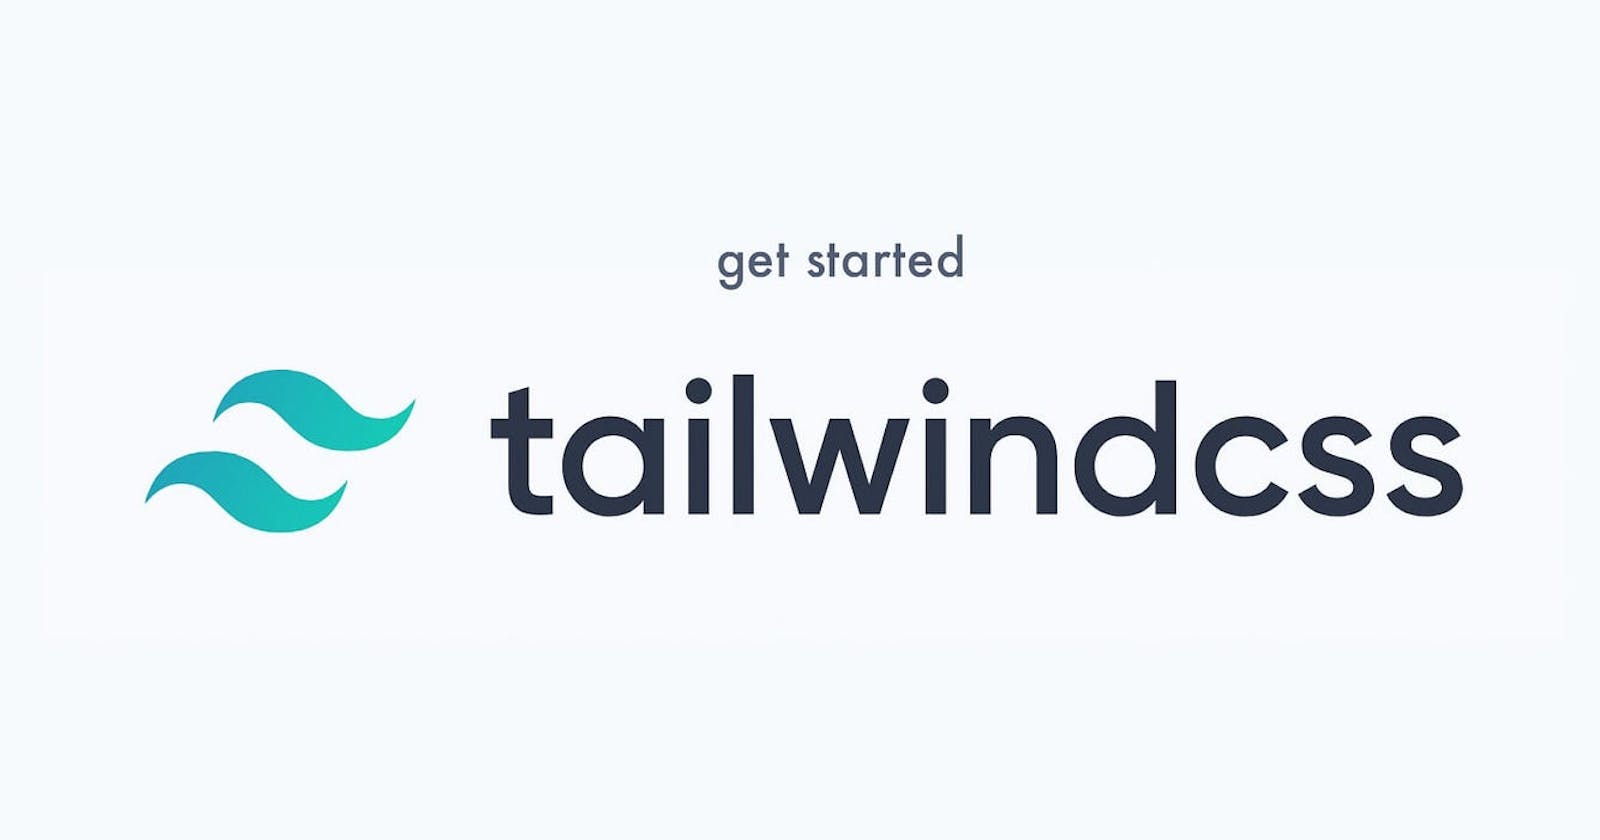 Getting started with Tailwind CSS